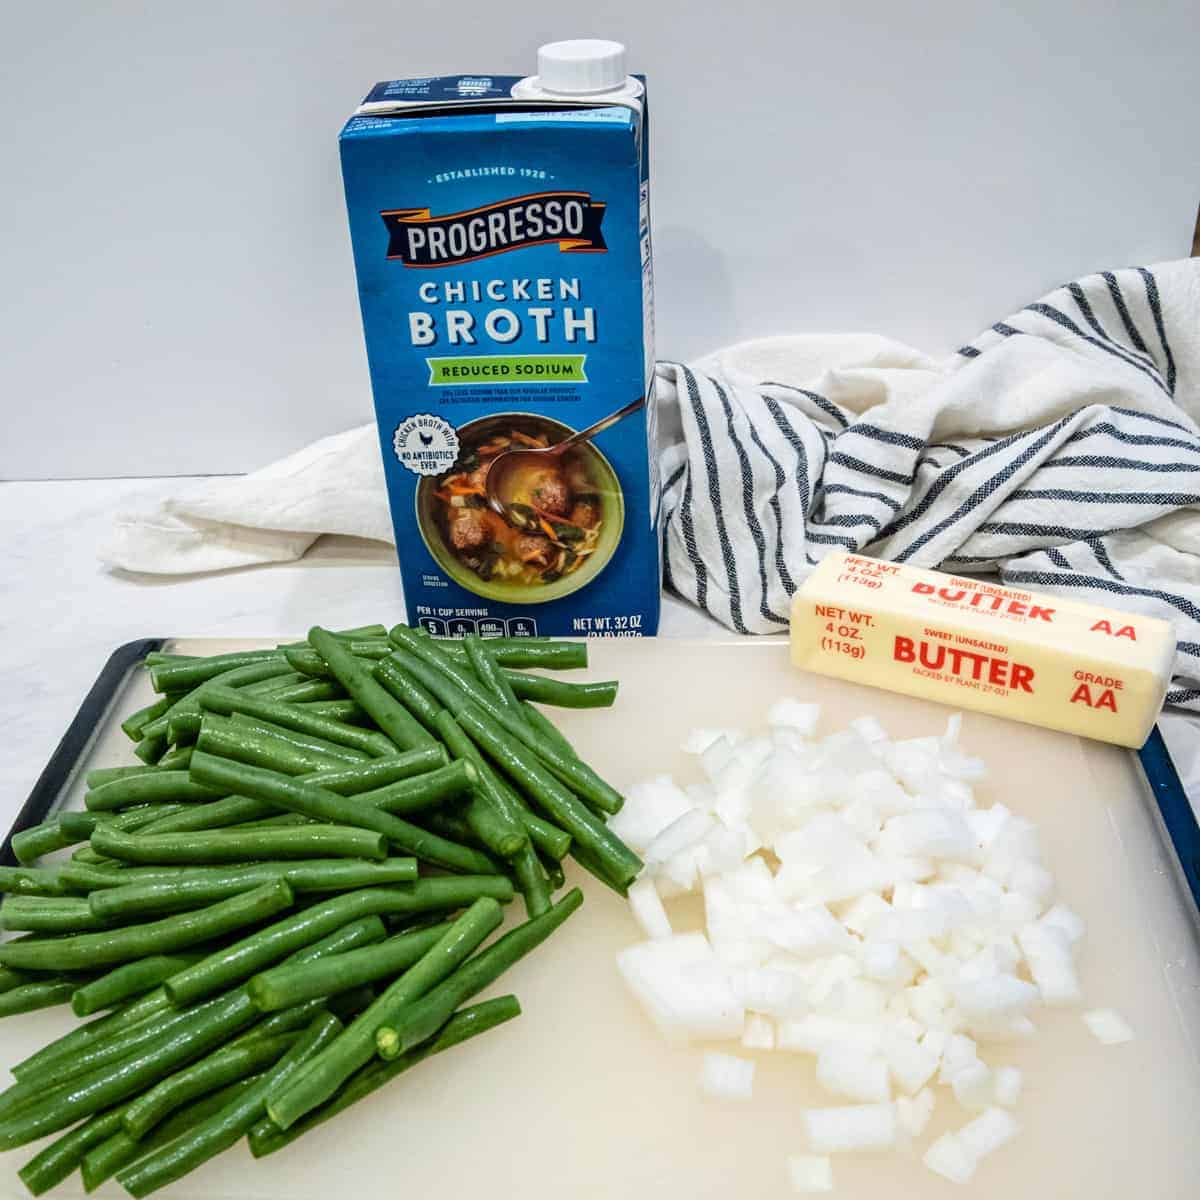 This image shows the ingredients needed for the dish. Fresh cut green beans shown alongside diced onion, chicken broth, and butter.